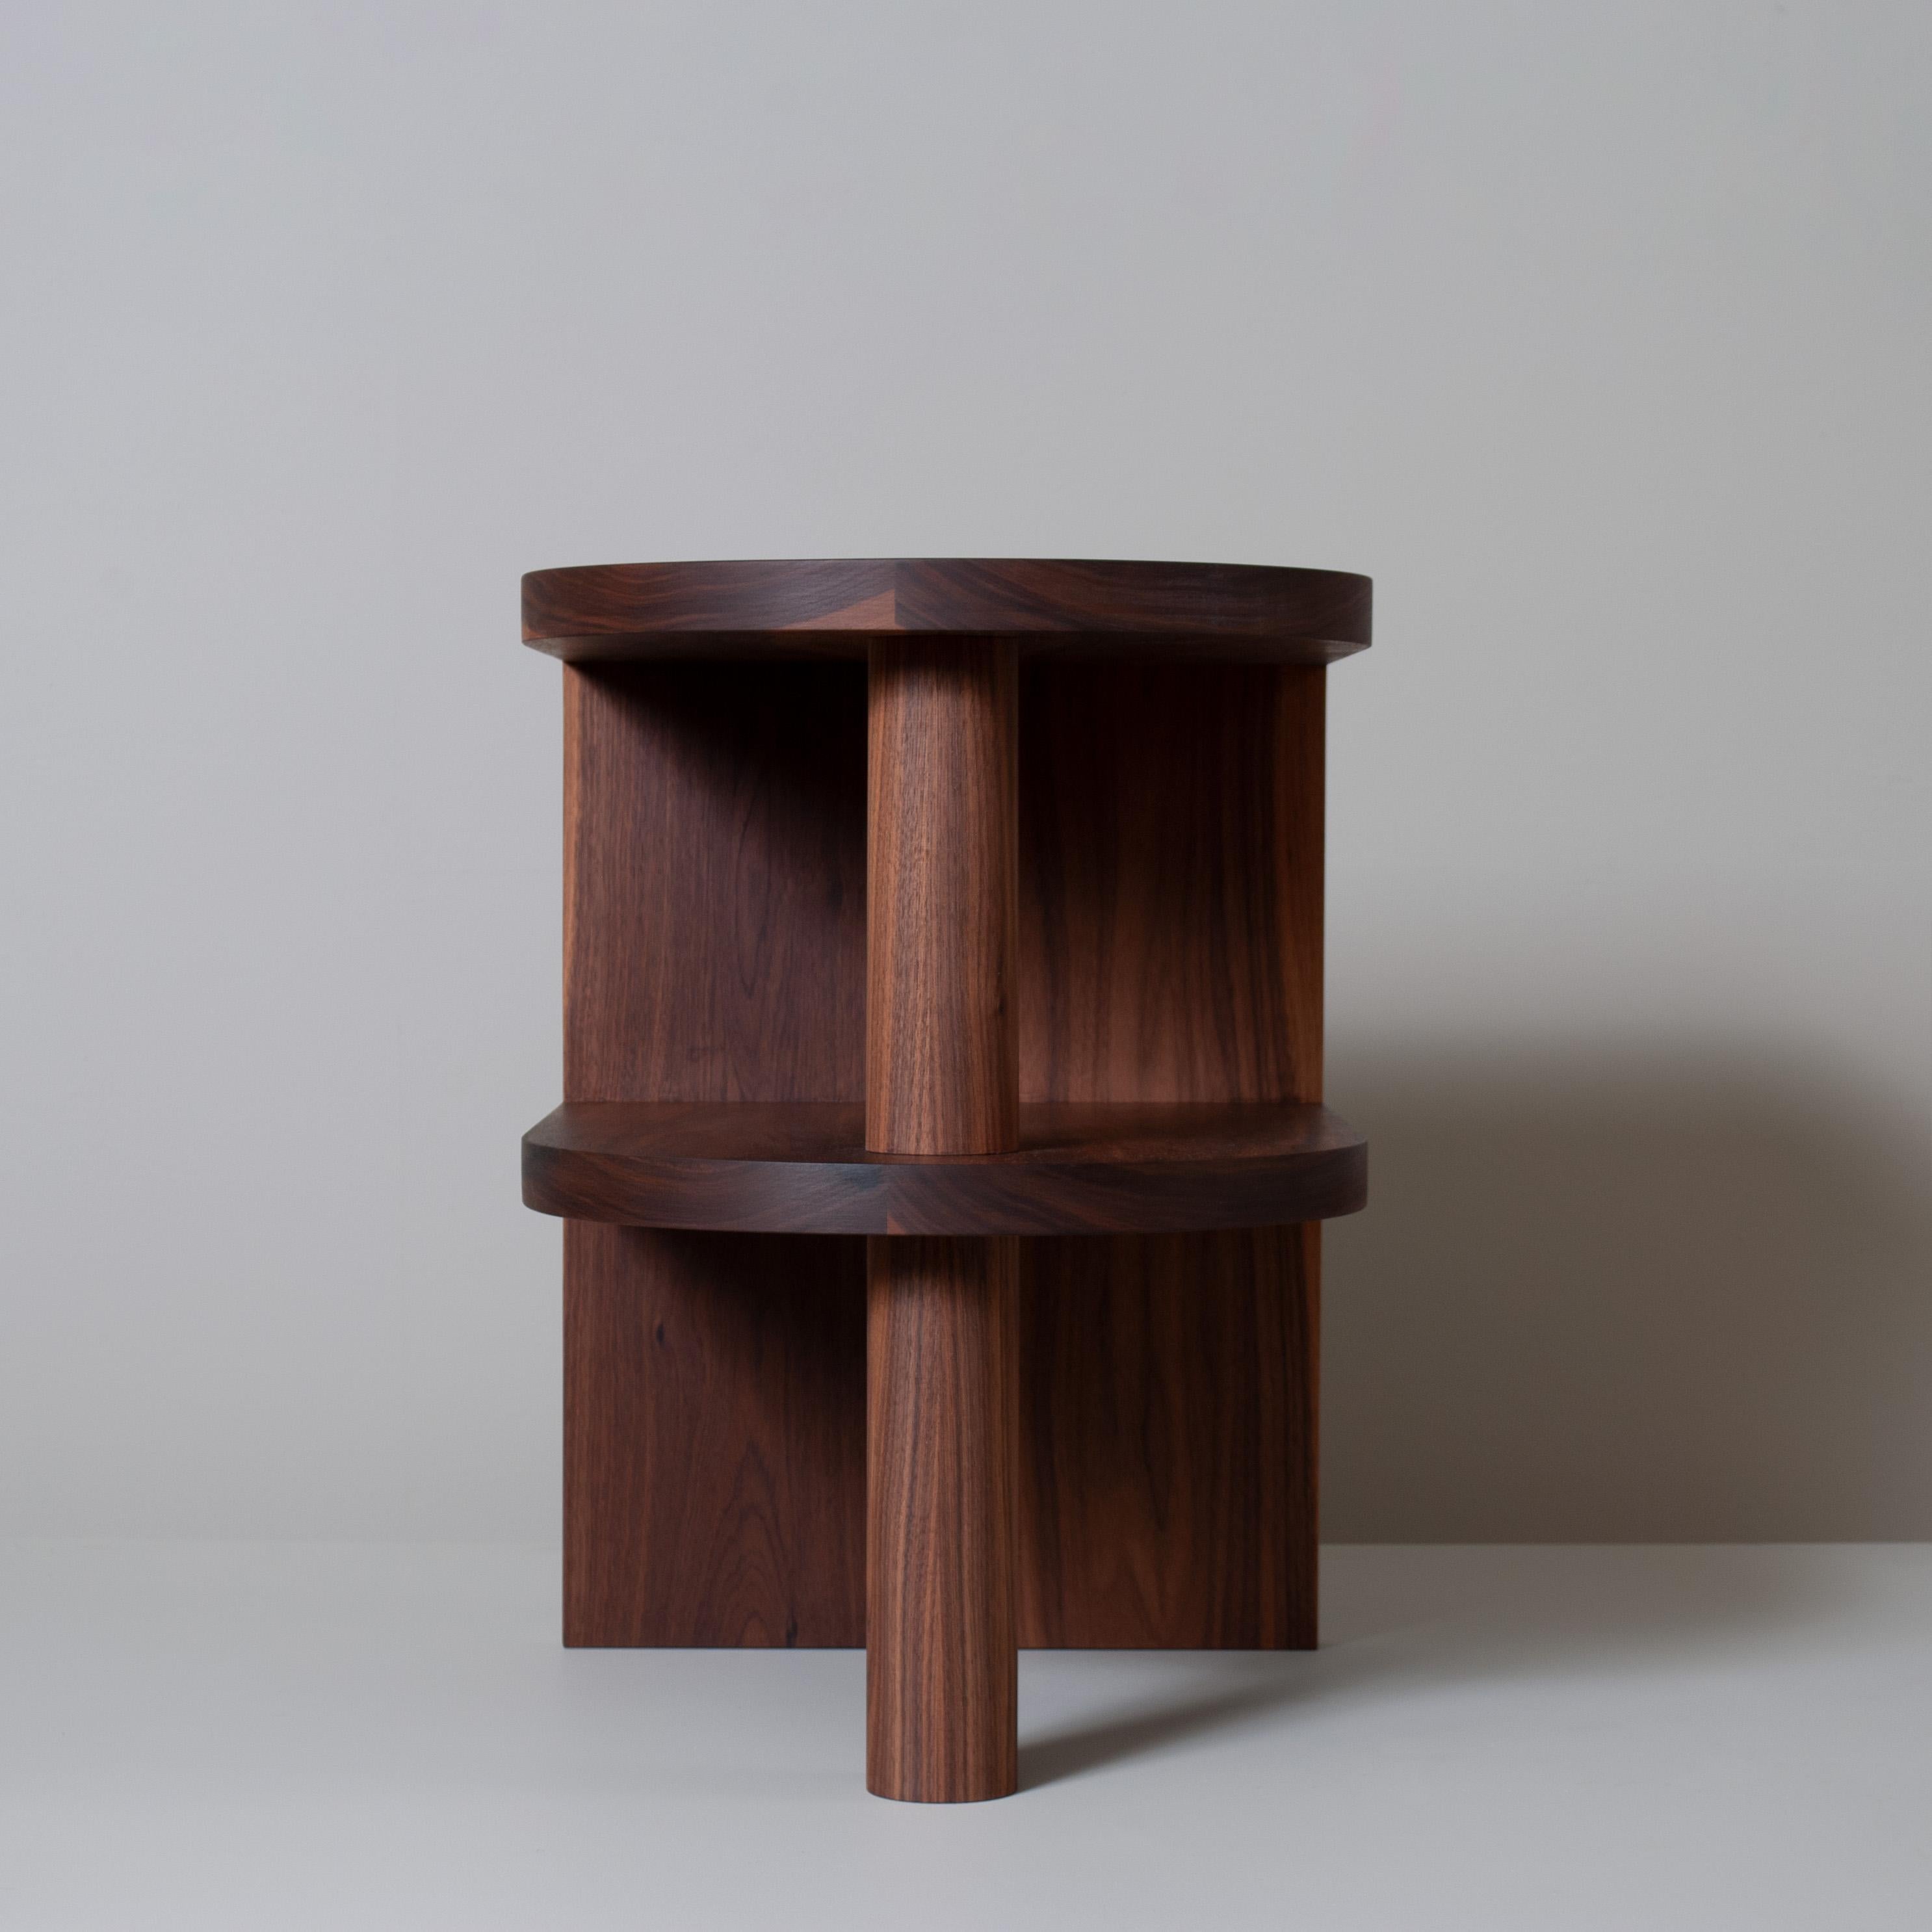 English Architectural Handcrafted Pillar Walnut End Table For Sale